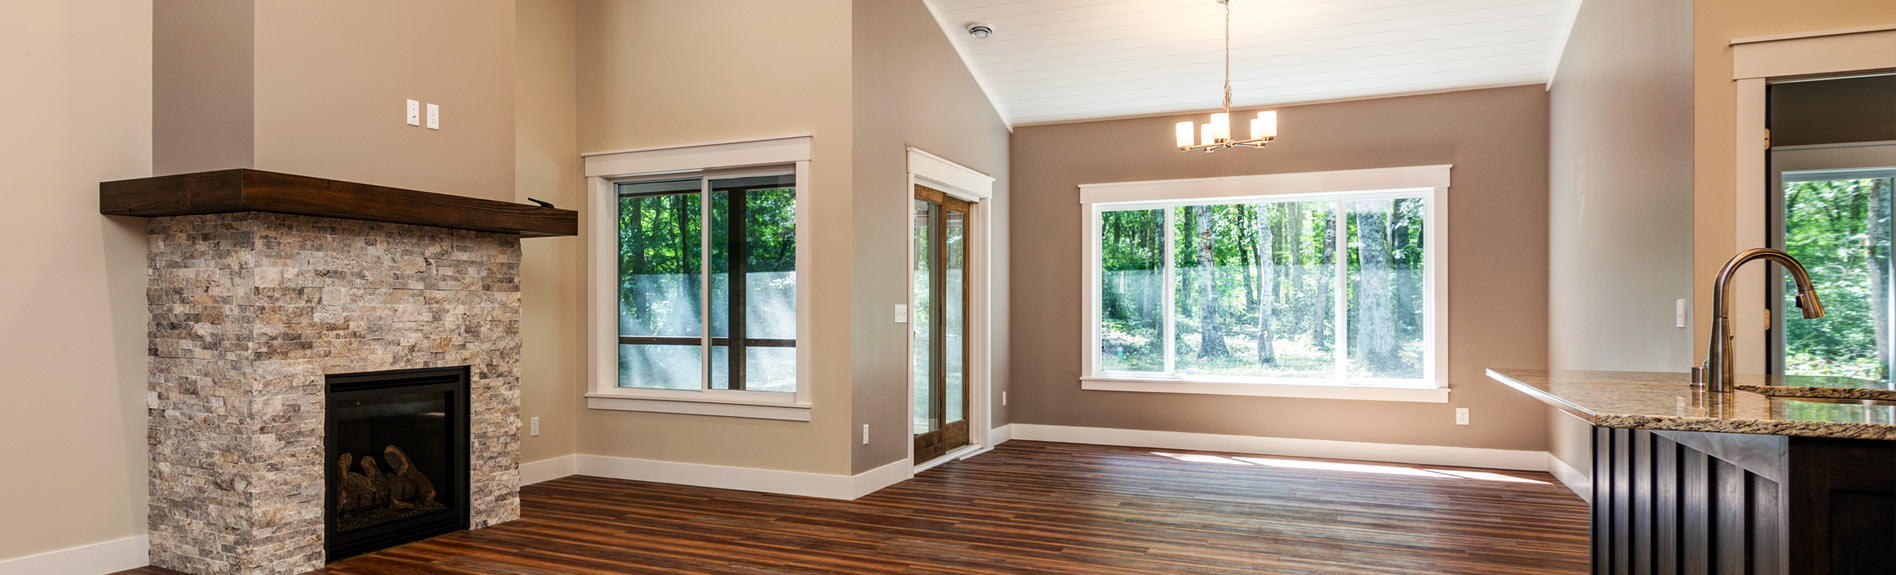 Open Floor Concept by DHC of the Lakes Area General Contractor - Minnesota